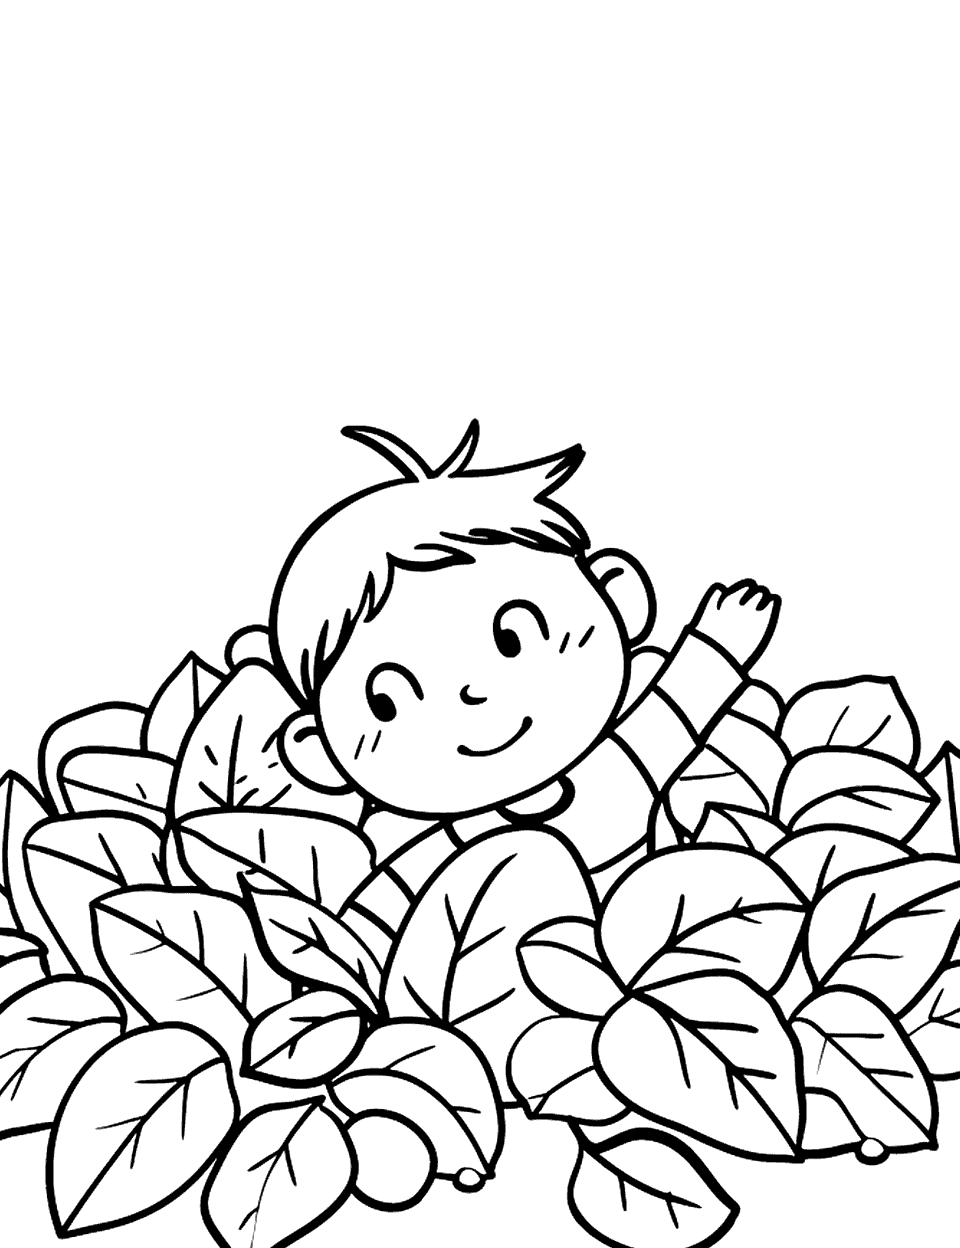 Fall Leaves Collection Toddler Coloring Page - A child playing in a pile of fall leaves.